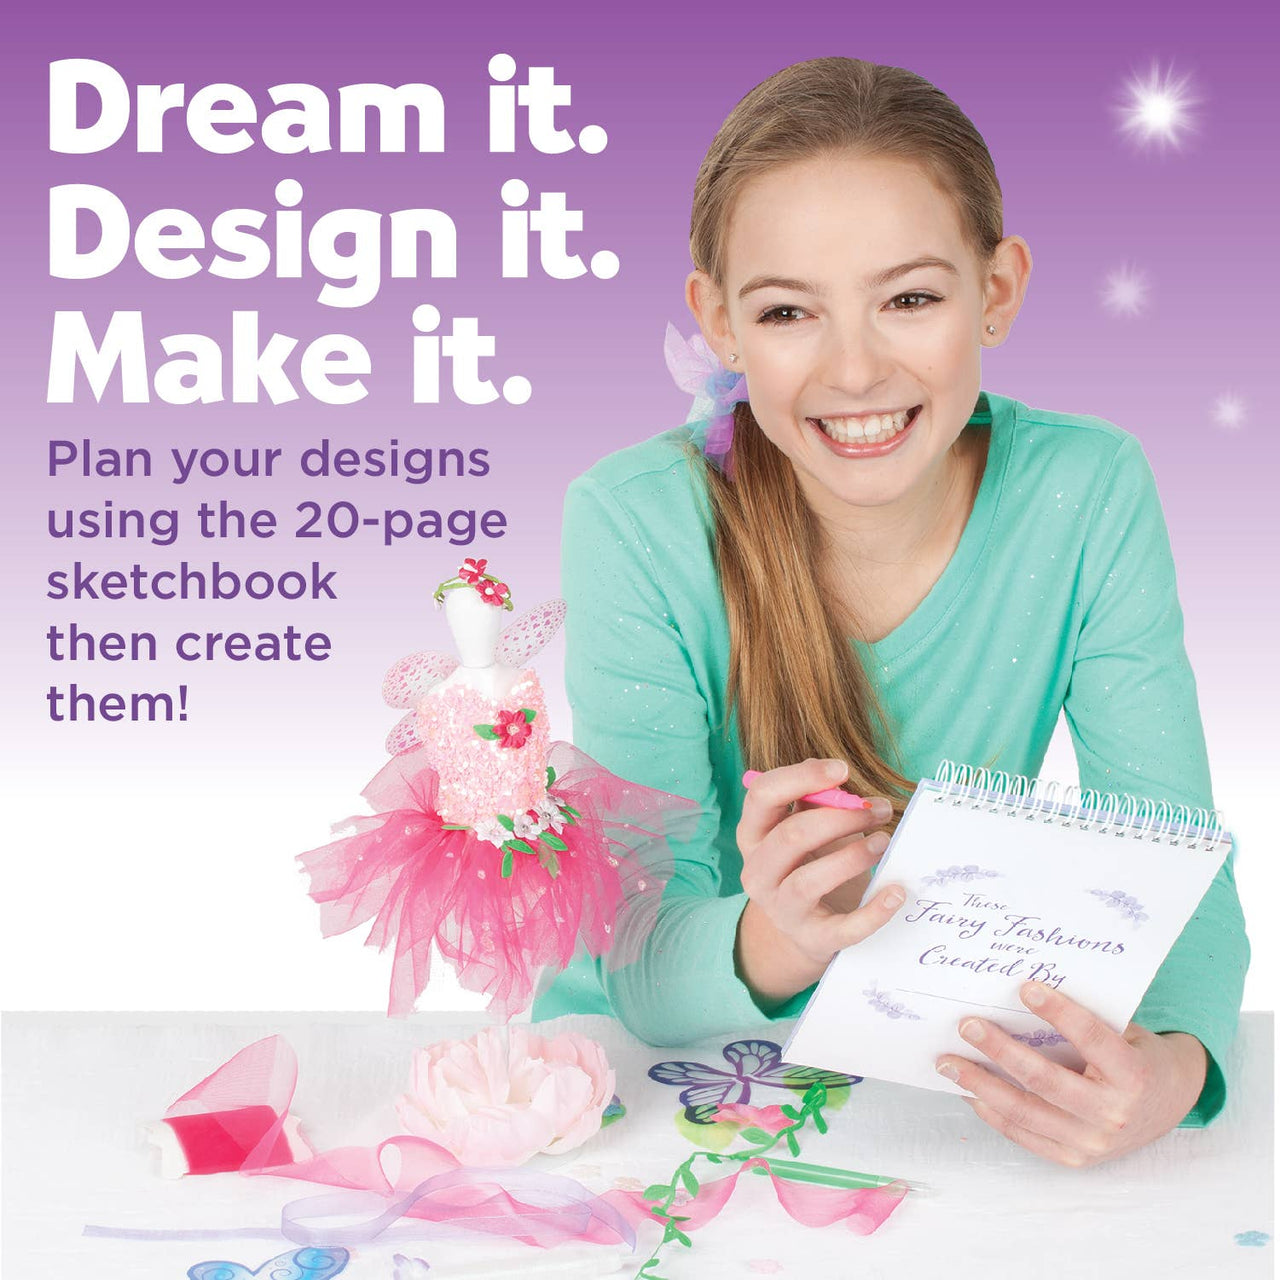 Designed by You Fairy Fashions Faber-Castell